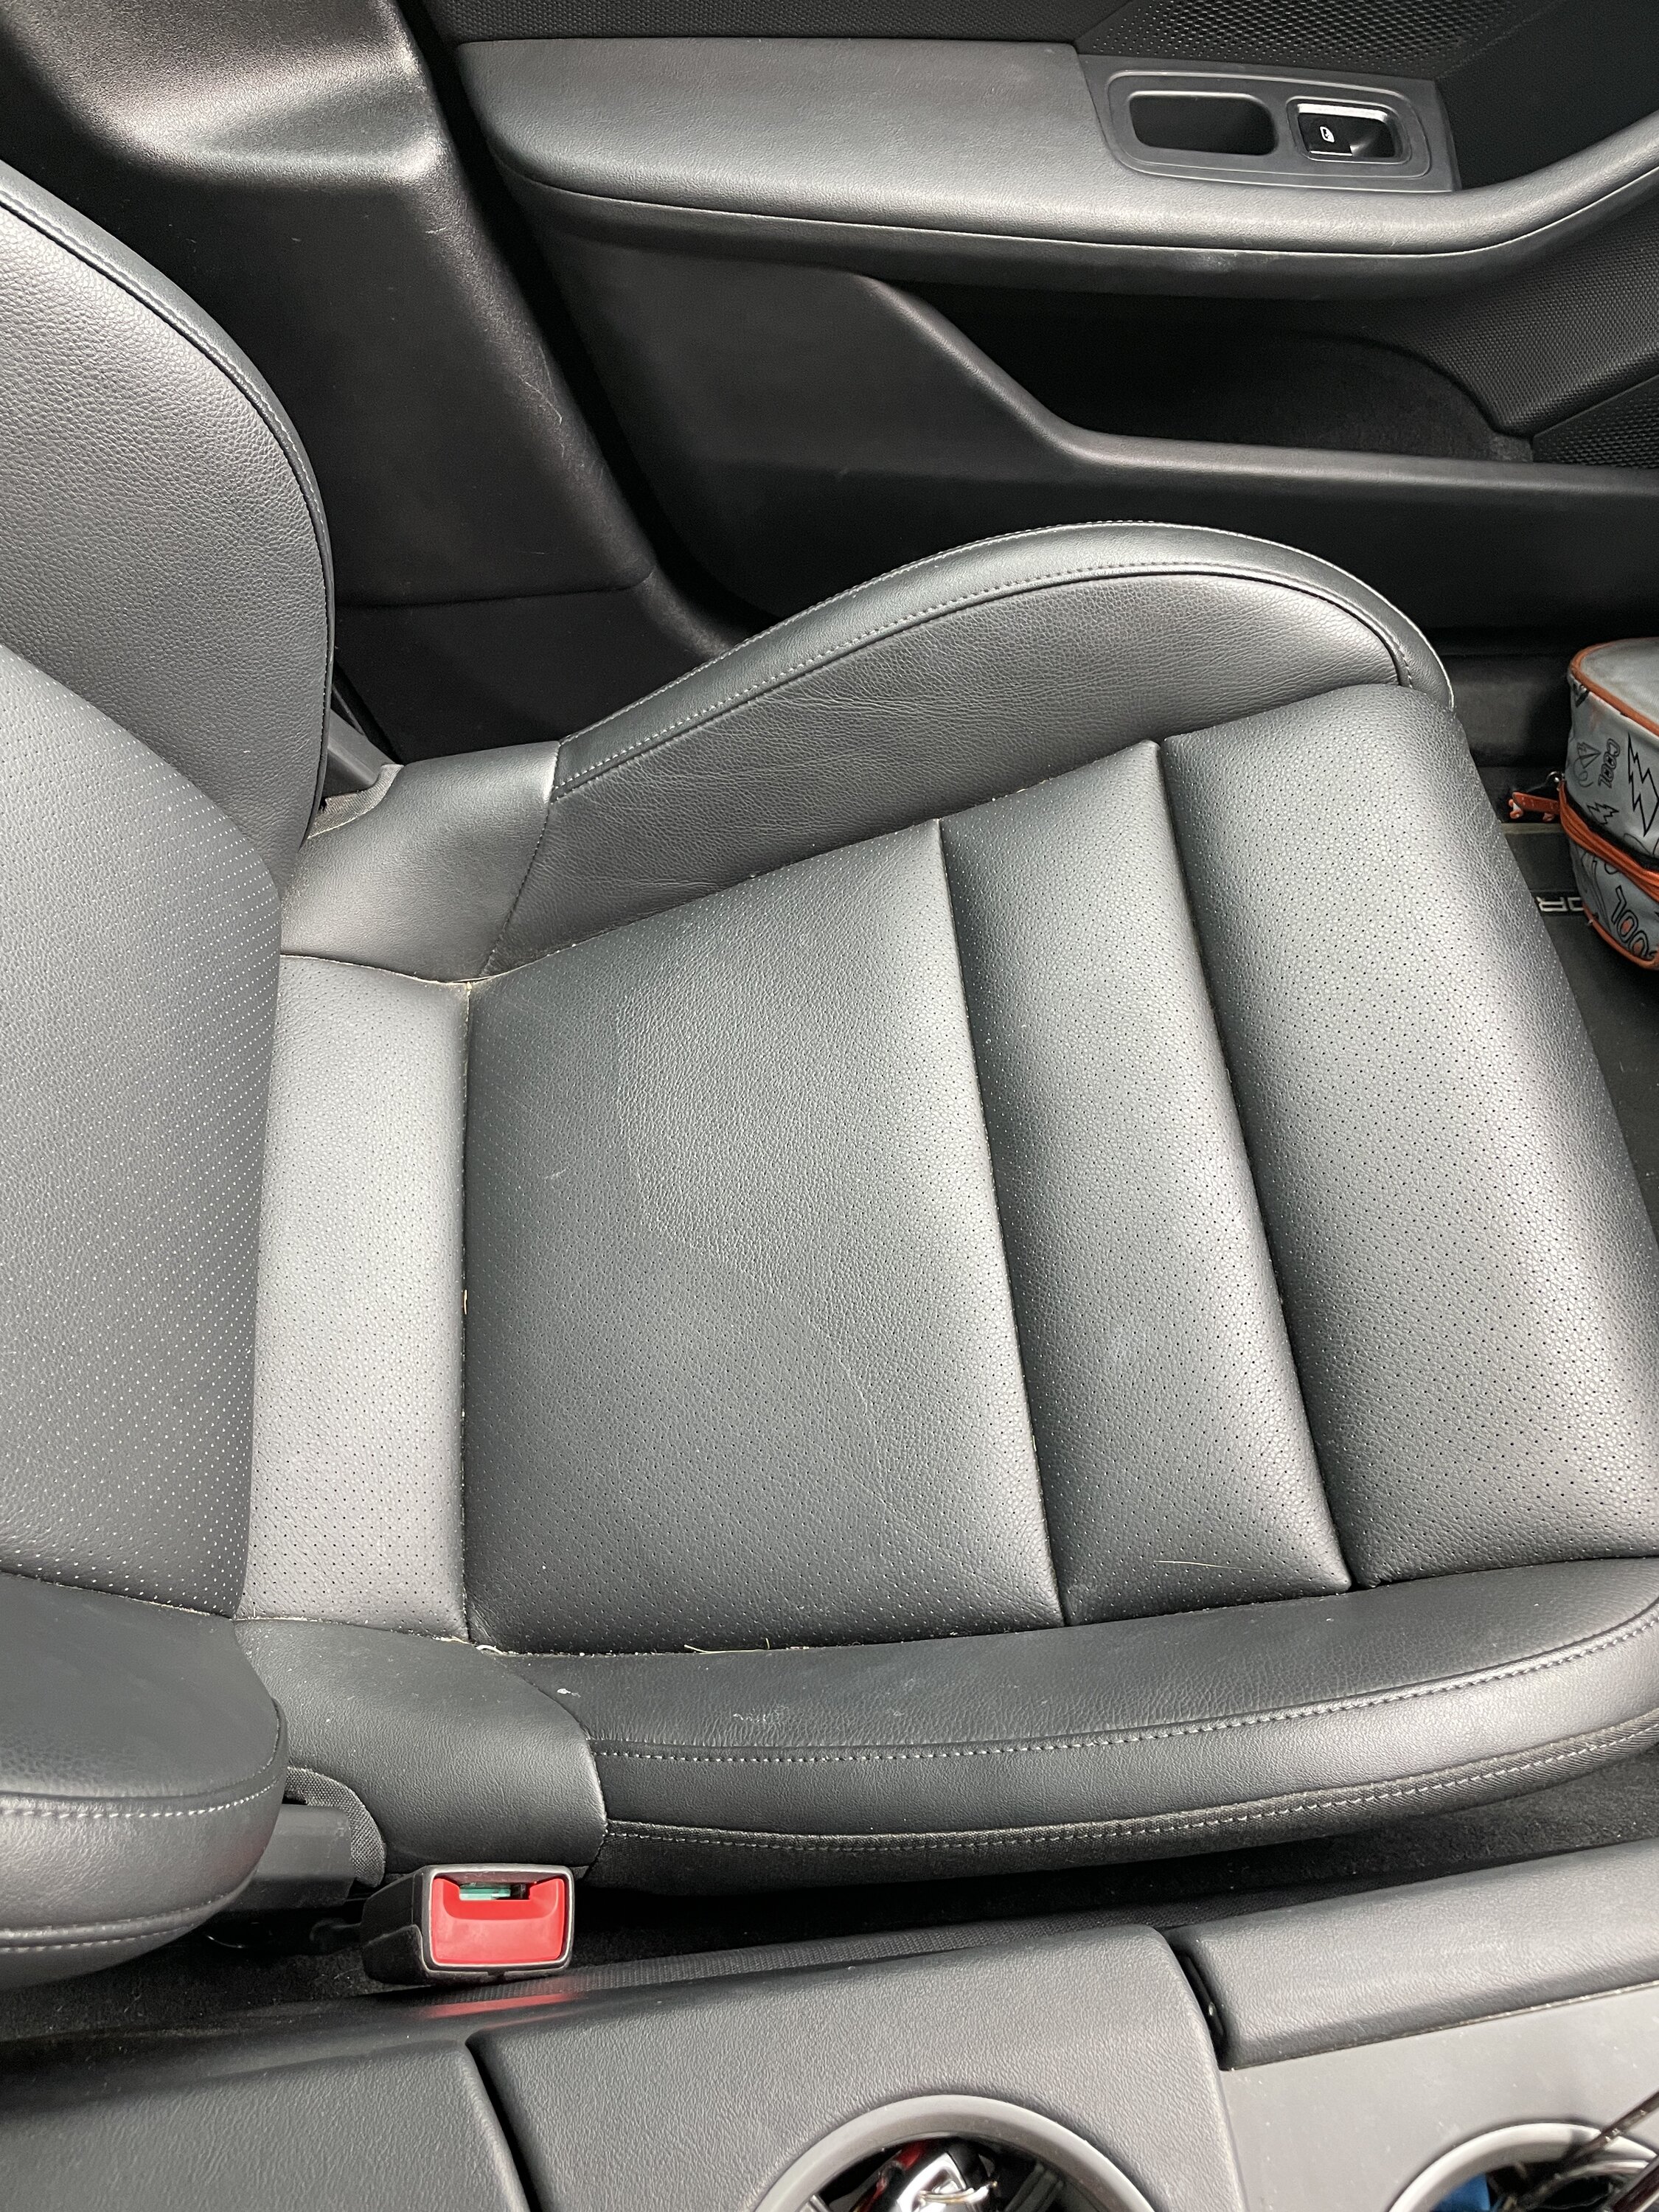 Porsche Taycan Taycan seat problem partial leather fault help (line and discolouration) 38692F2F-B622-4949-9B64-F2700CB5C0BE